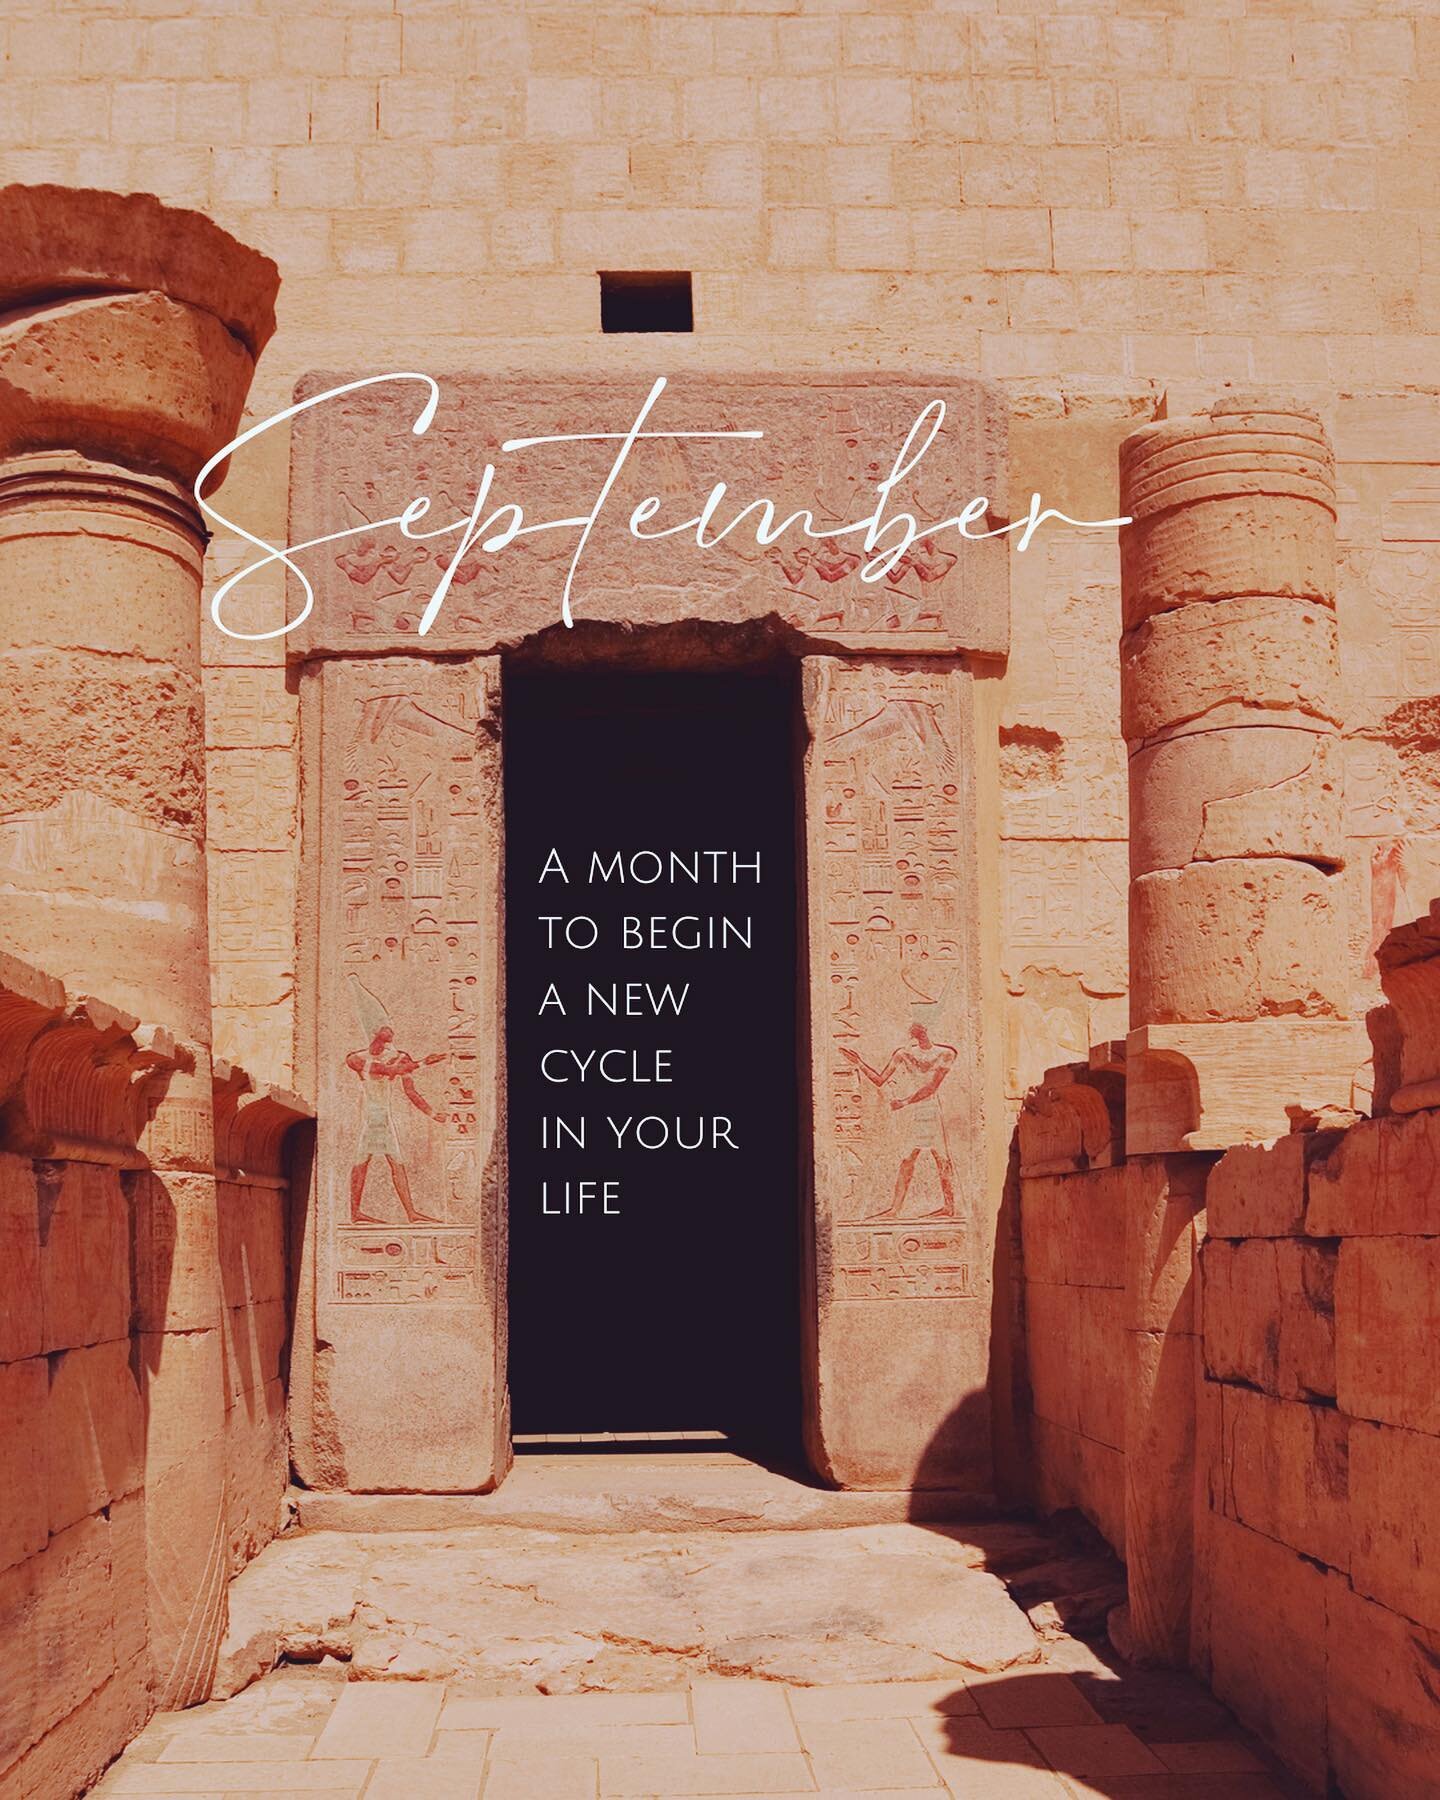 ▿ The Temple Doors are opening and we welcome September and a new cycle in our lives.

▵ In this month we find the way into a new cycle in our lives.
Number 9 in numerology wants us to explore our spiritual life. 
Like my teacher Ana Otero so beautif